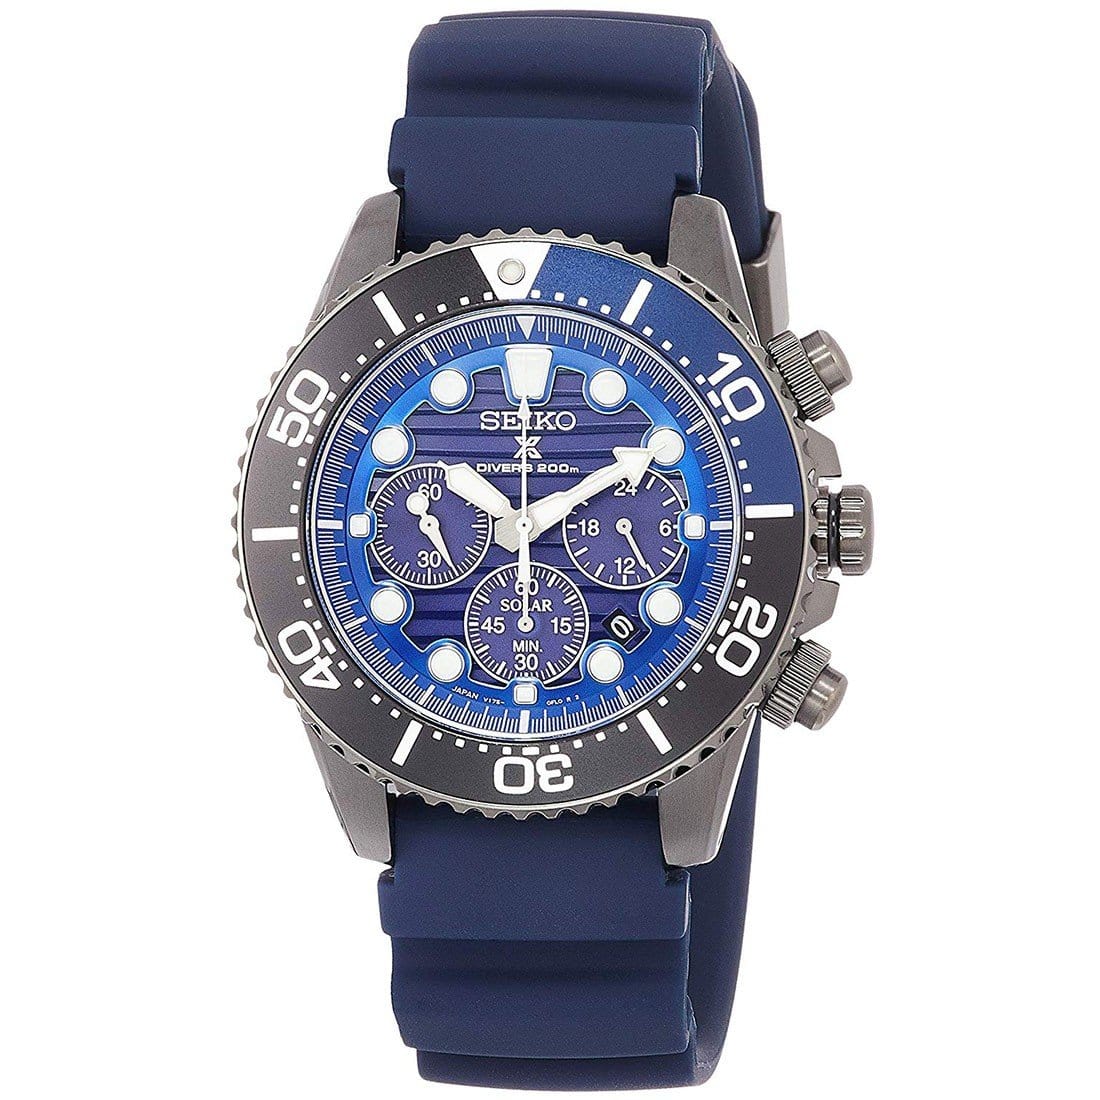 SBDL057 Seiko Prospex Save The Ocean Solar Chronograph Male Divers Watch